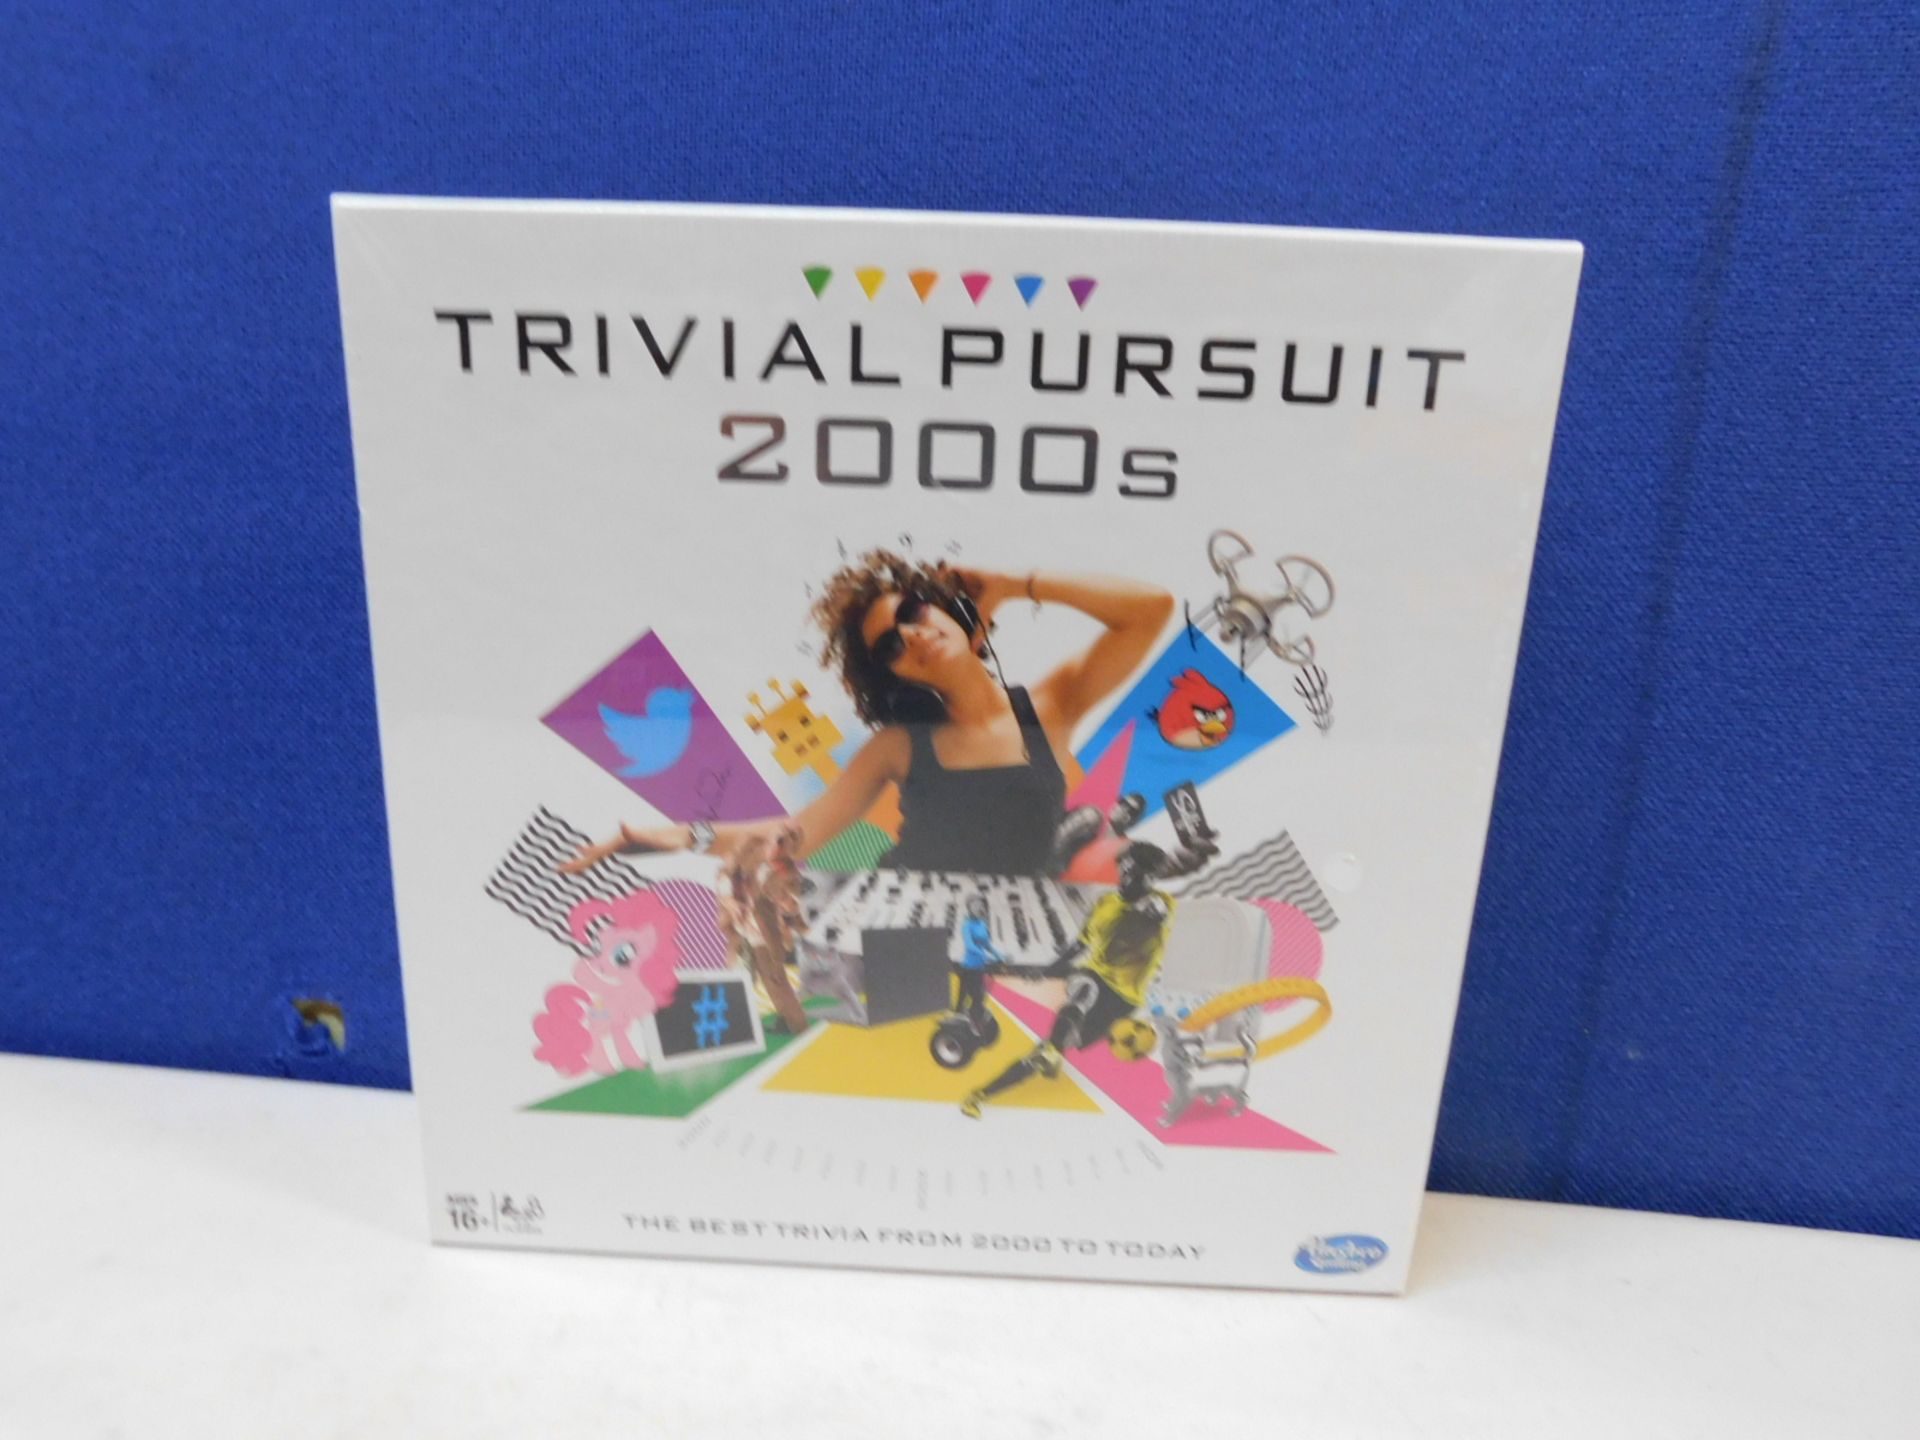 1 BRAND NEW BOXED TRIVIAL PURSUIT 2000S BOARD GAME RRP £39.99